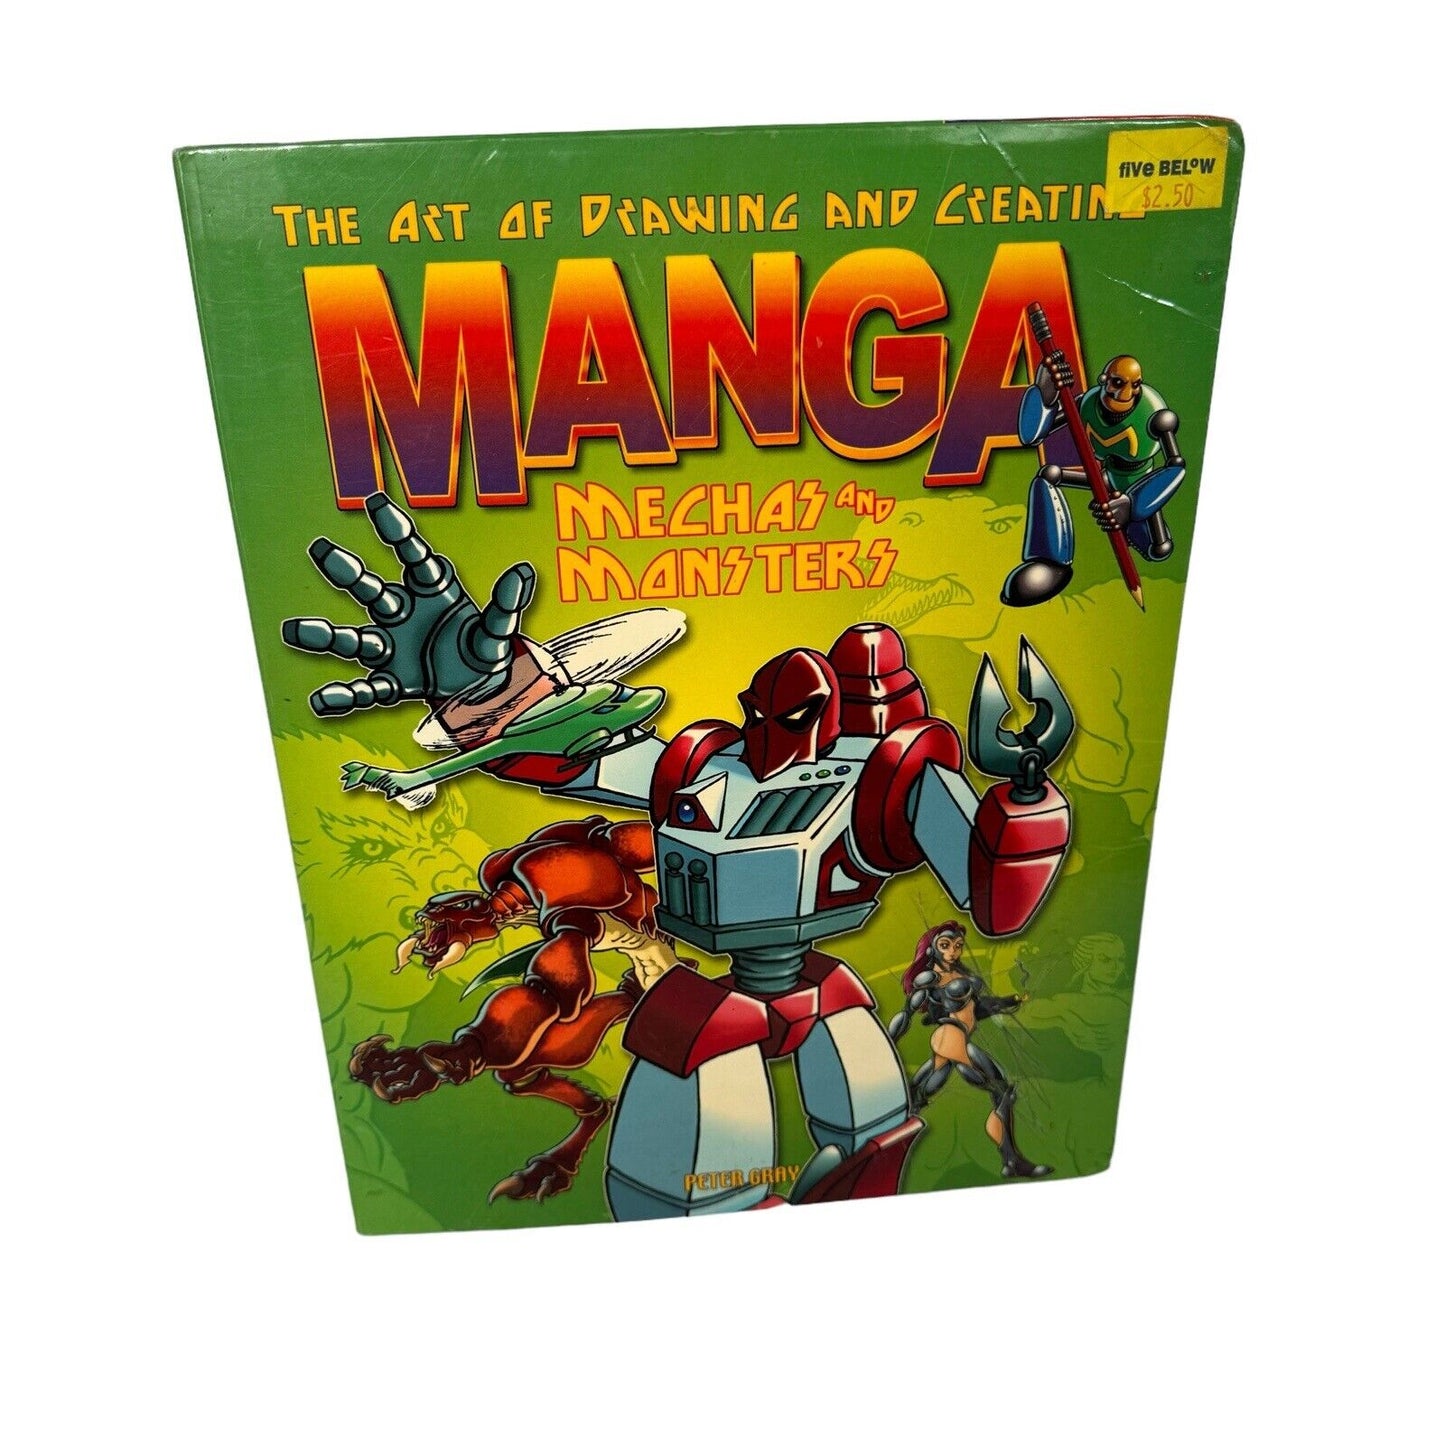 THE ART OF DRAWING AND CREATING MANGA, Mechas and Monsters Book The Fast Free